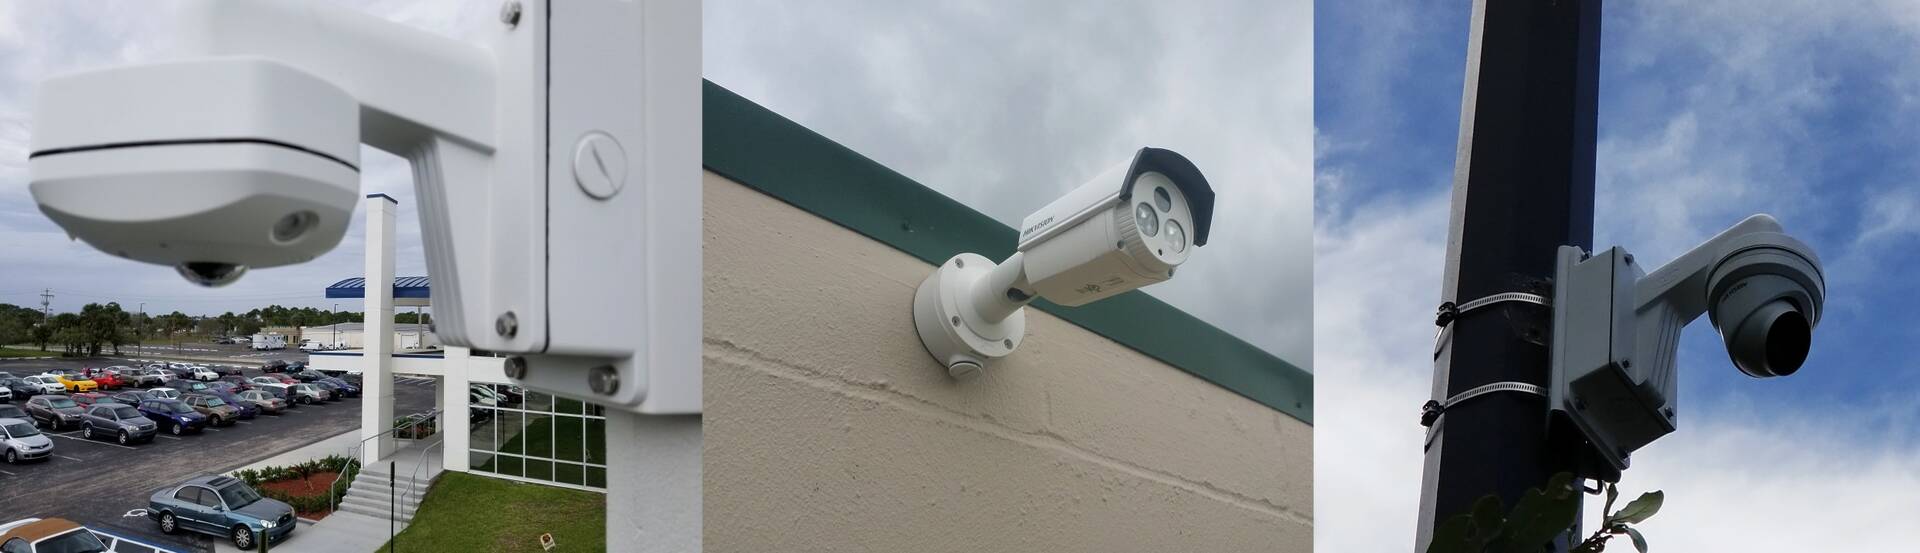 COMMERCIAL SECURITY & SURVEILLANCE SOLUTIONS